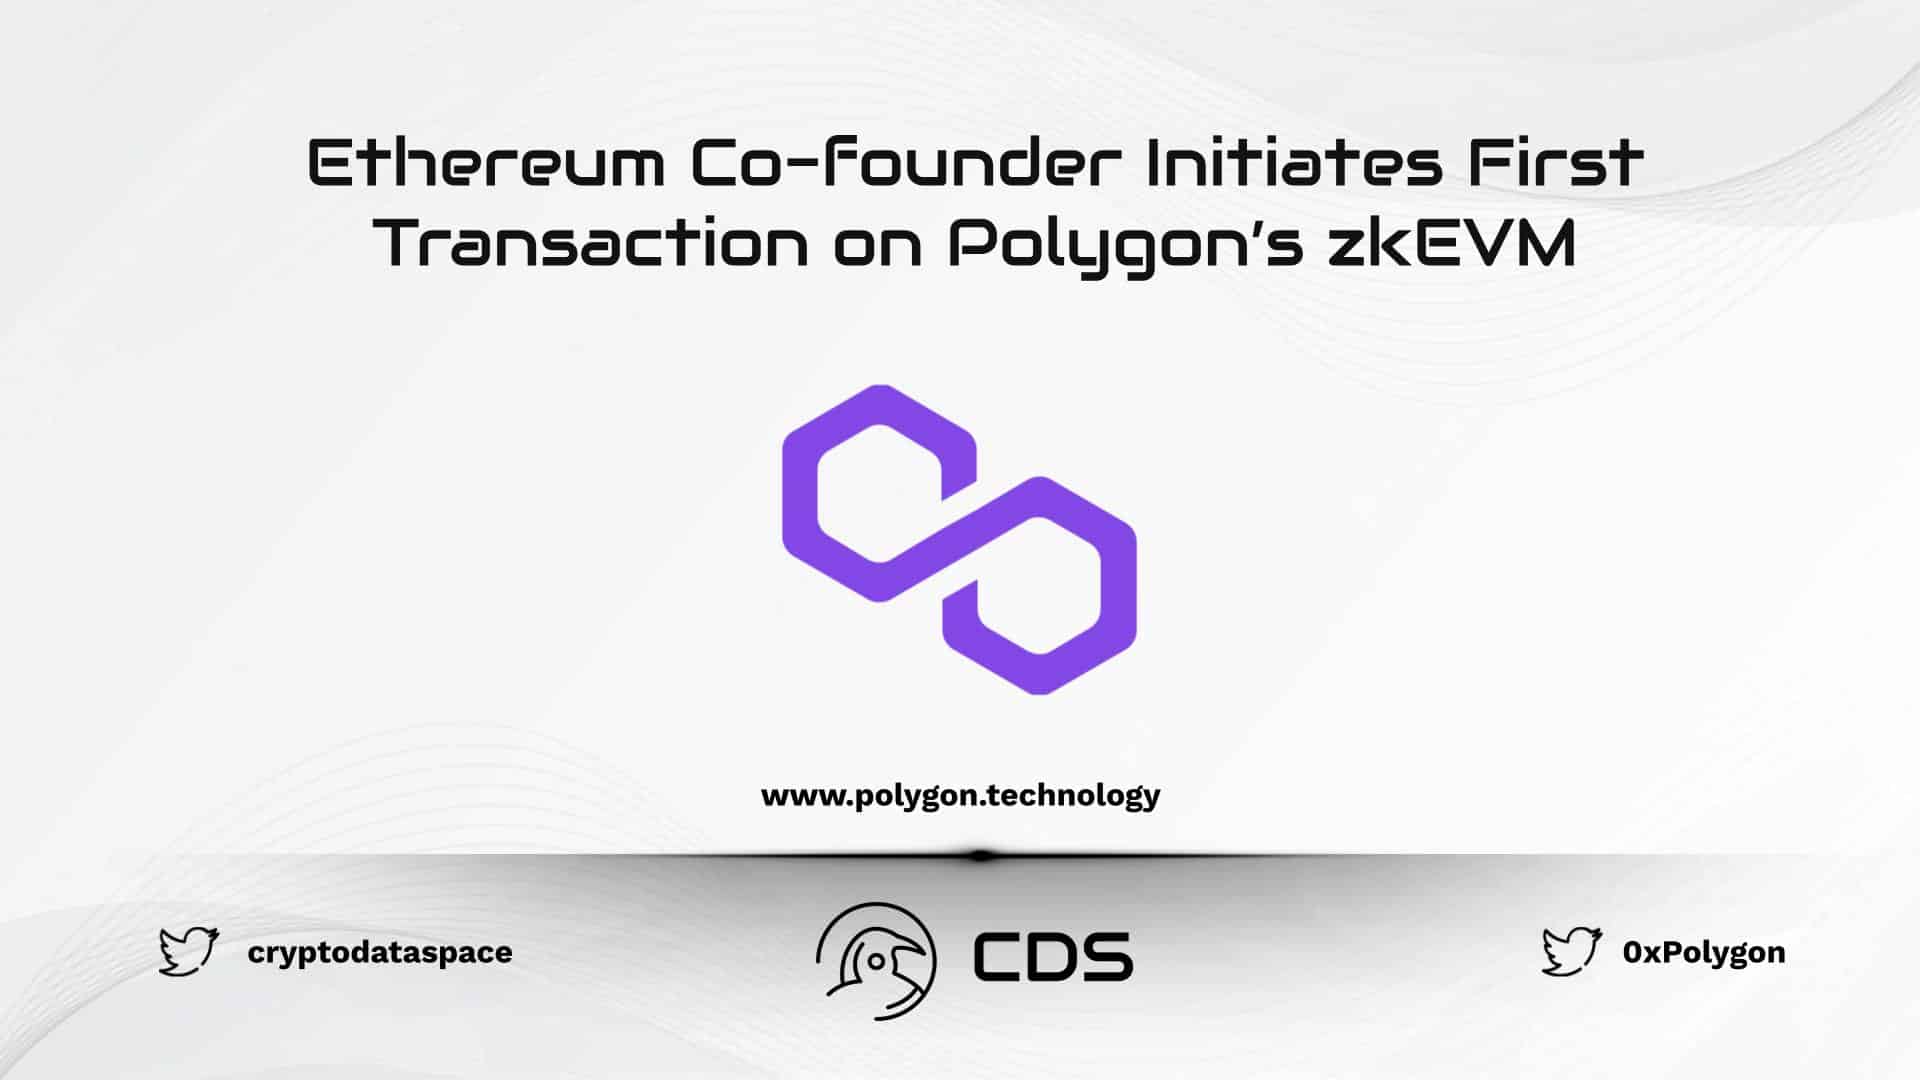 Ethereum Co-founder Initiates First Transaction on Polygon’s zkEVM